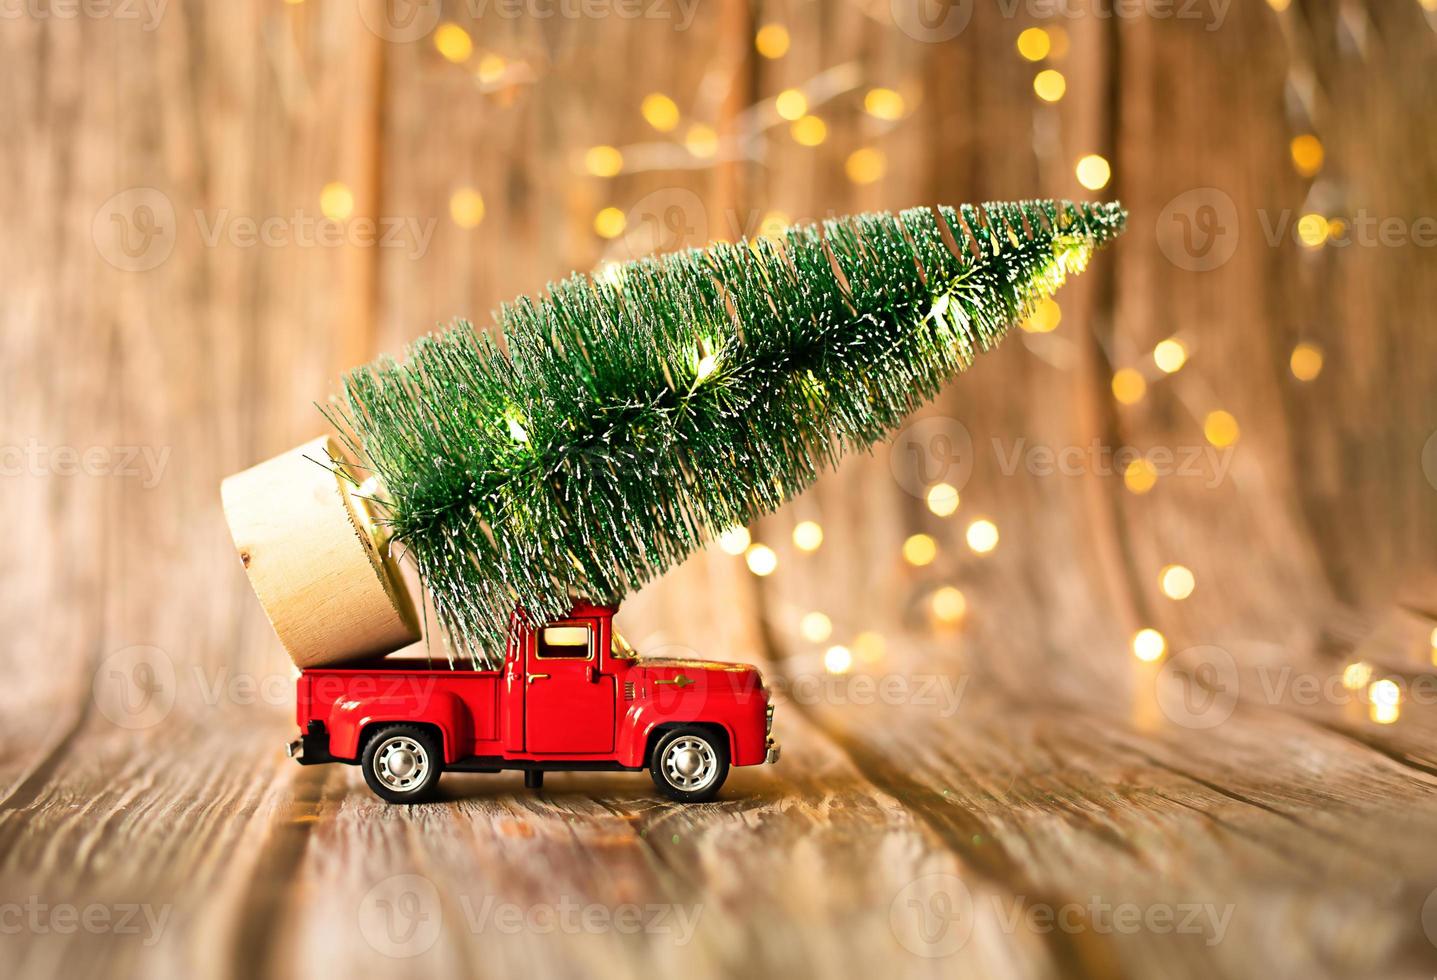 miniature car on wooden background with christmas light, holiday gift. photo